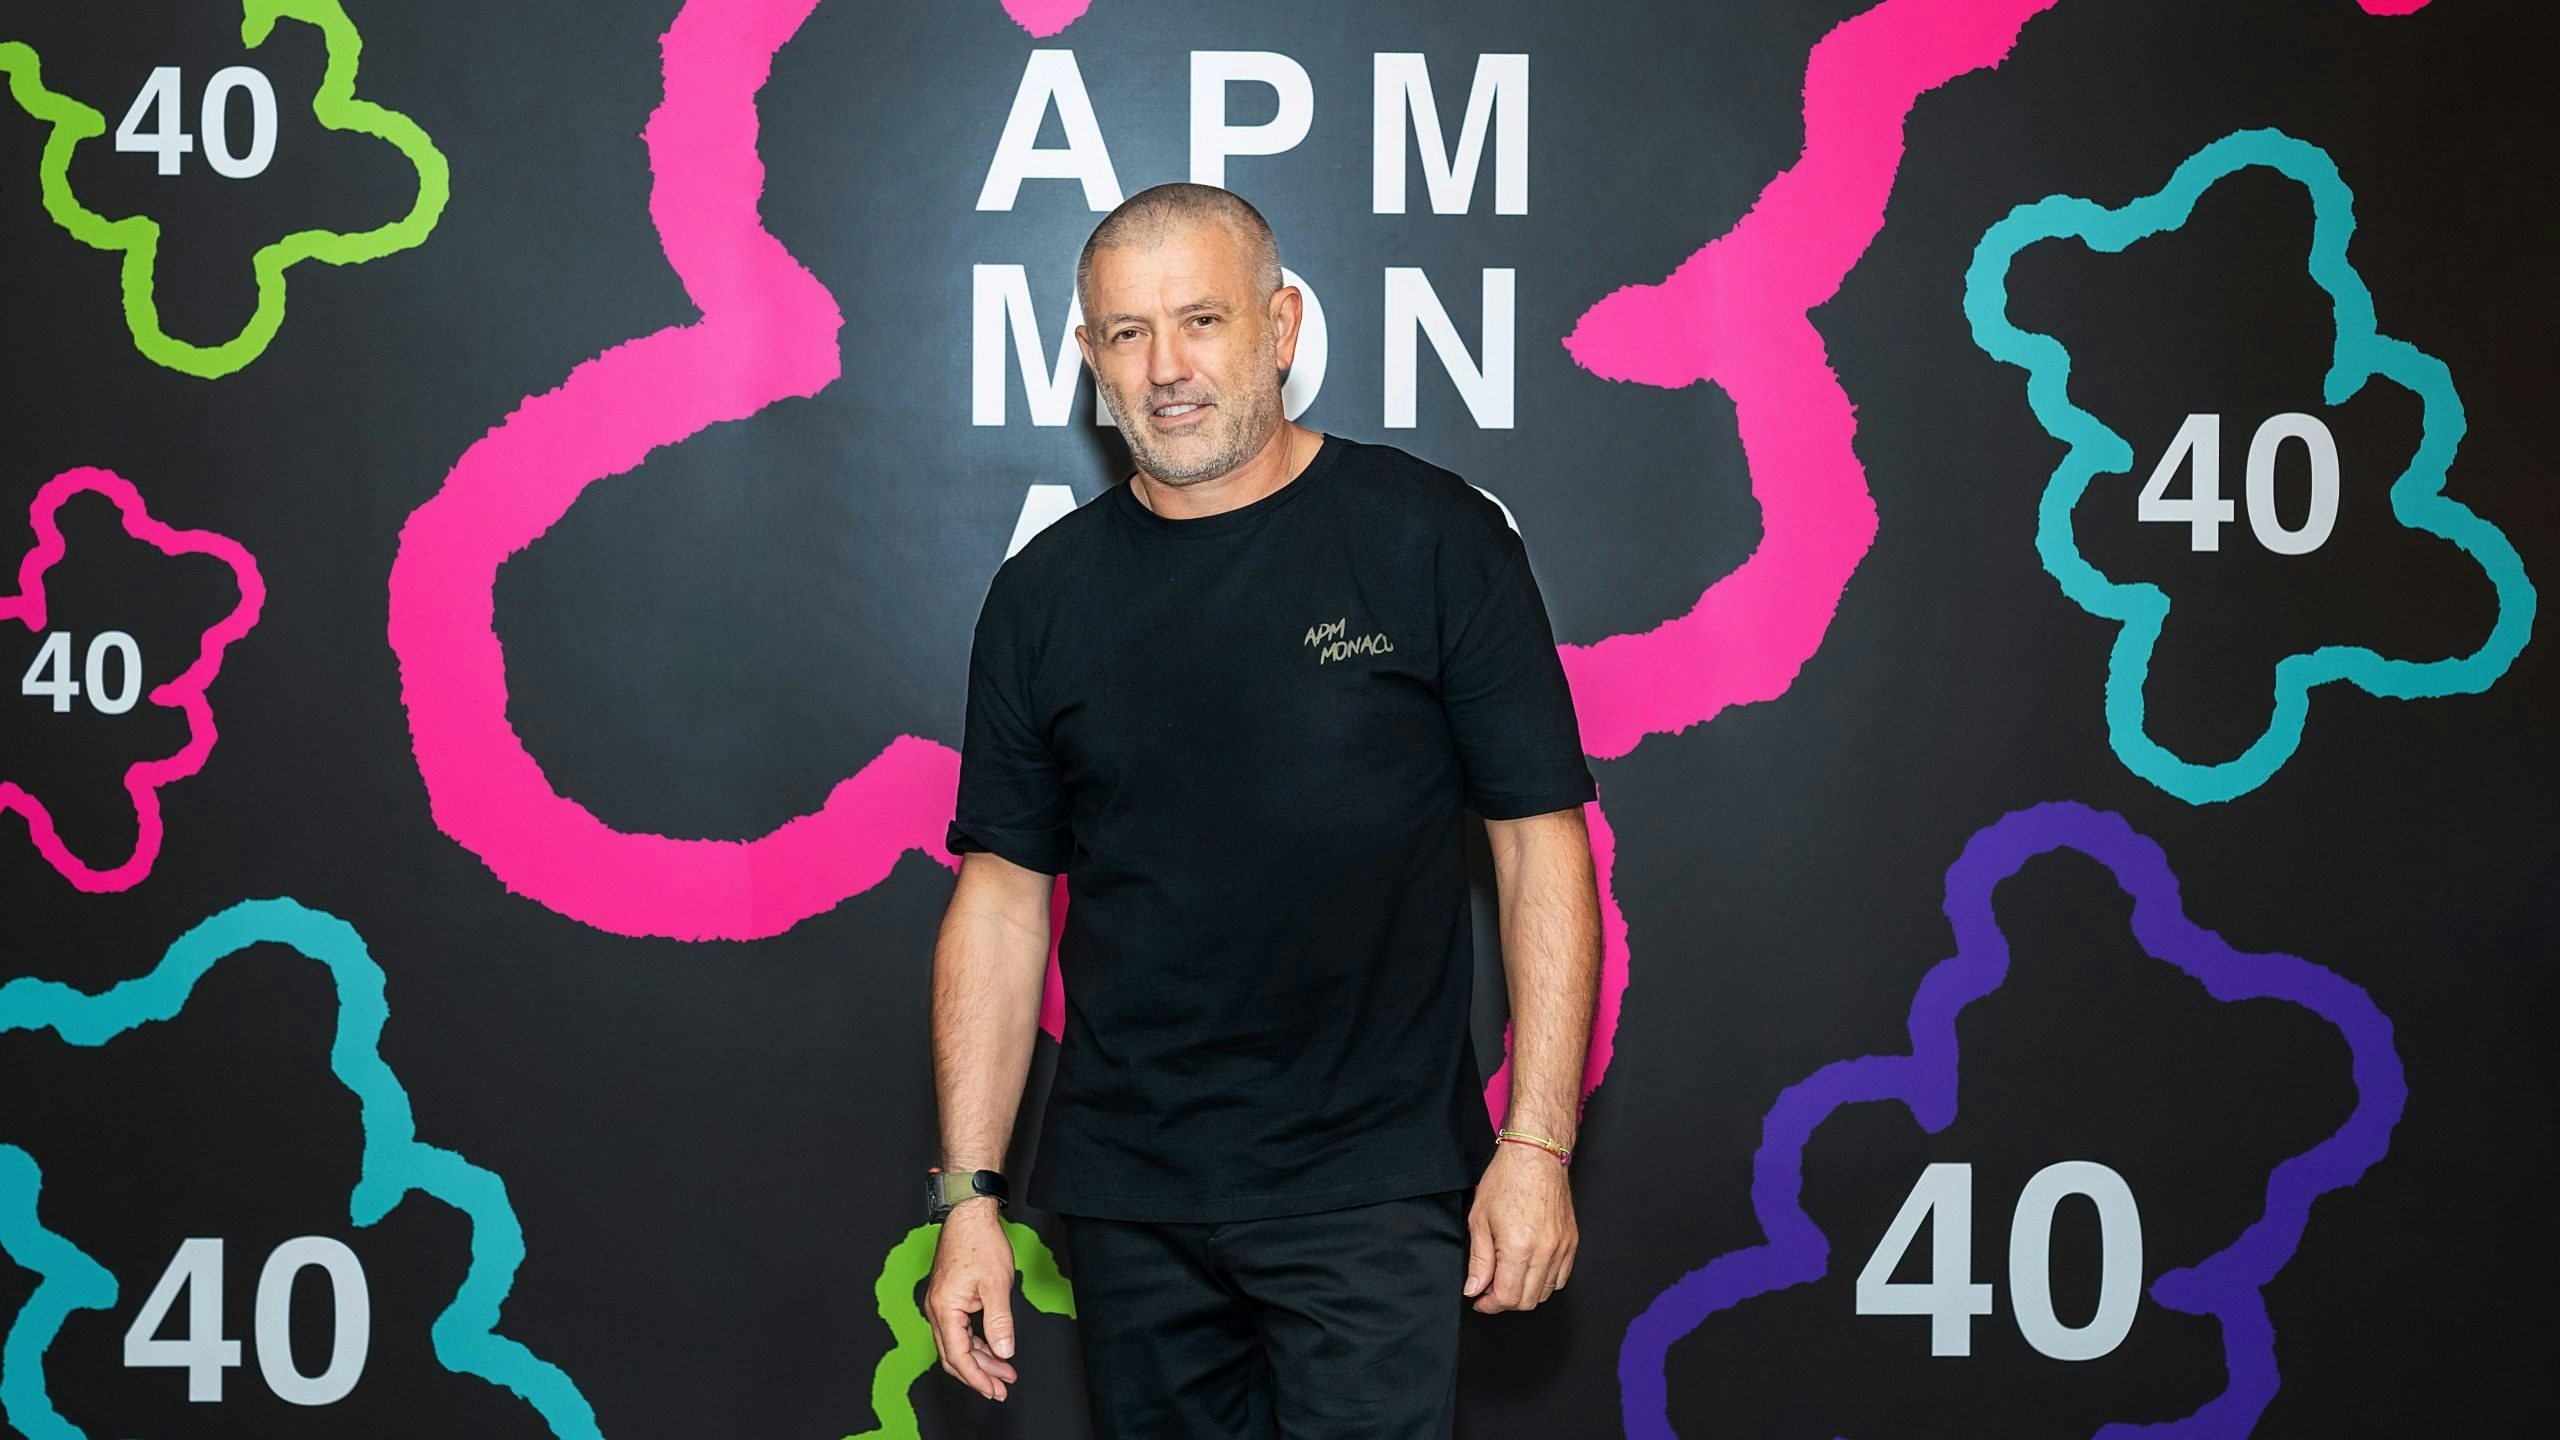 Known for monthly drops of hand-crafted silver collections, APM Monaco was one of the first foreign brands to enter China back in 1992. What’s behind its continued success? Photo: Courtesy of APM Monaco